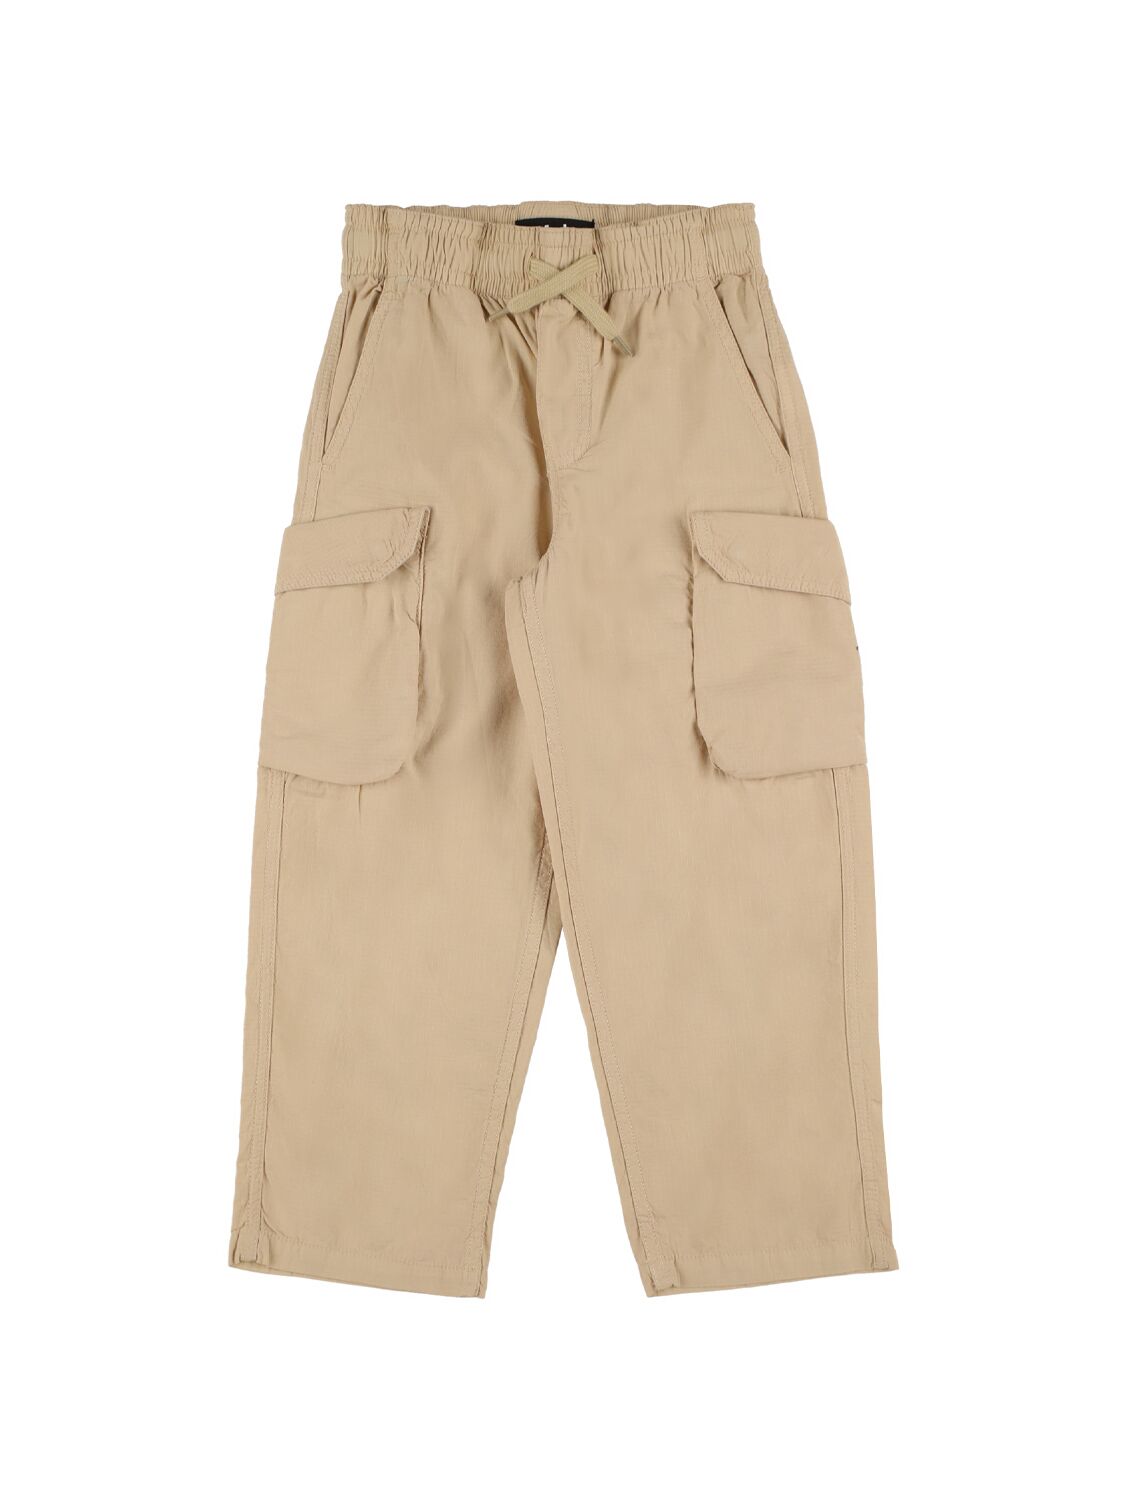 Image of Cotton Cargo Pants